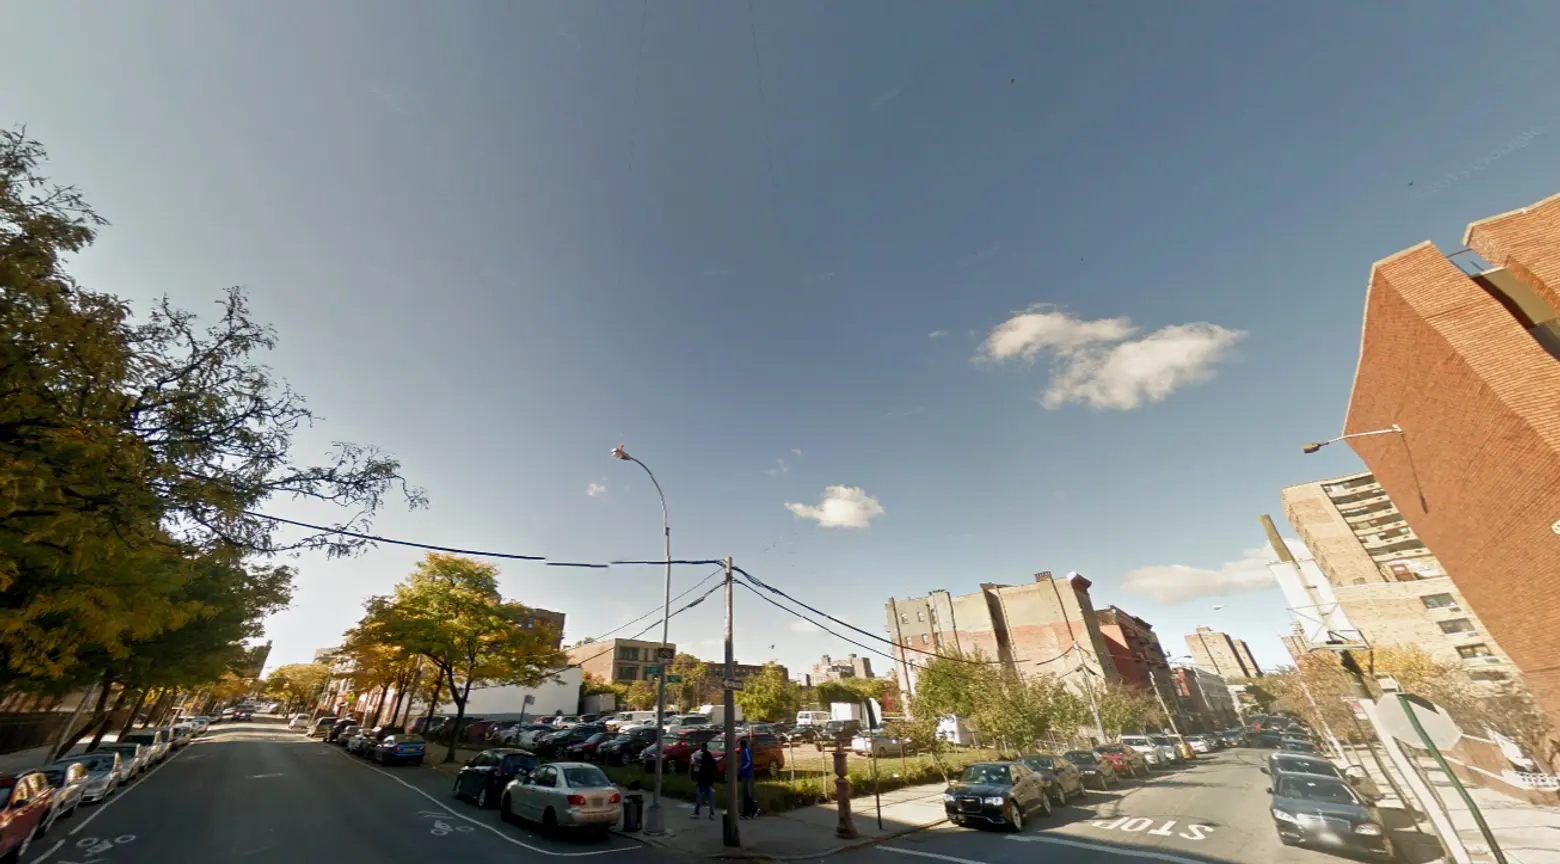 142nd Street and Saint Anne's, RTKL Architects, Affordable Housing, Bronx apartments